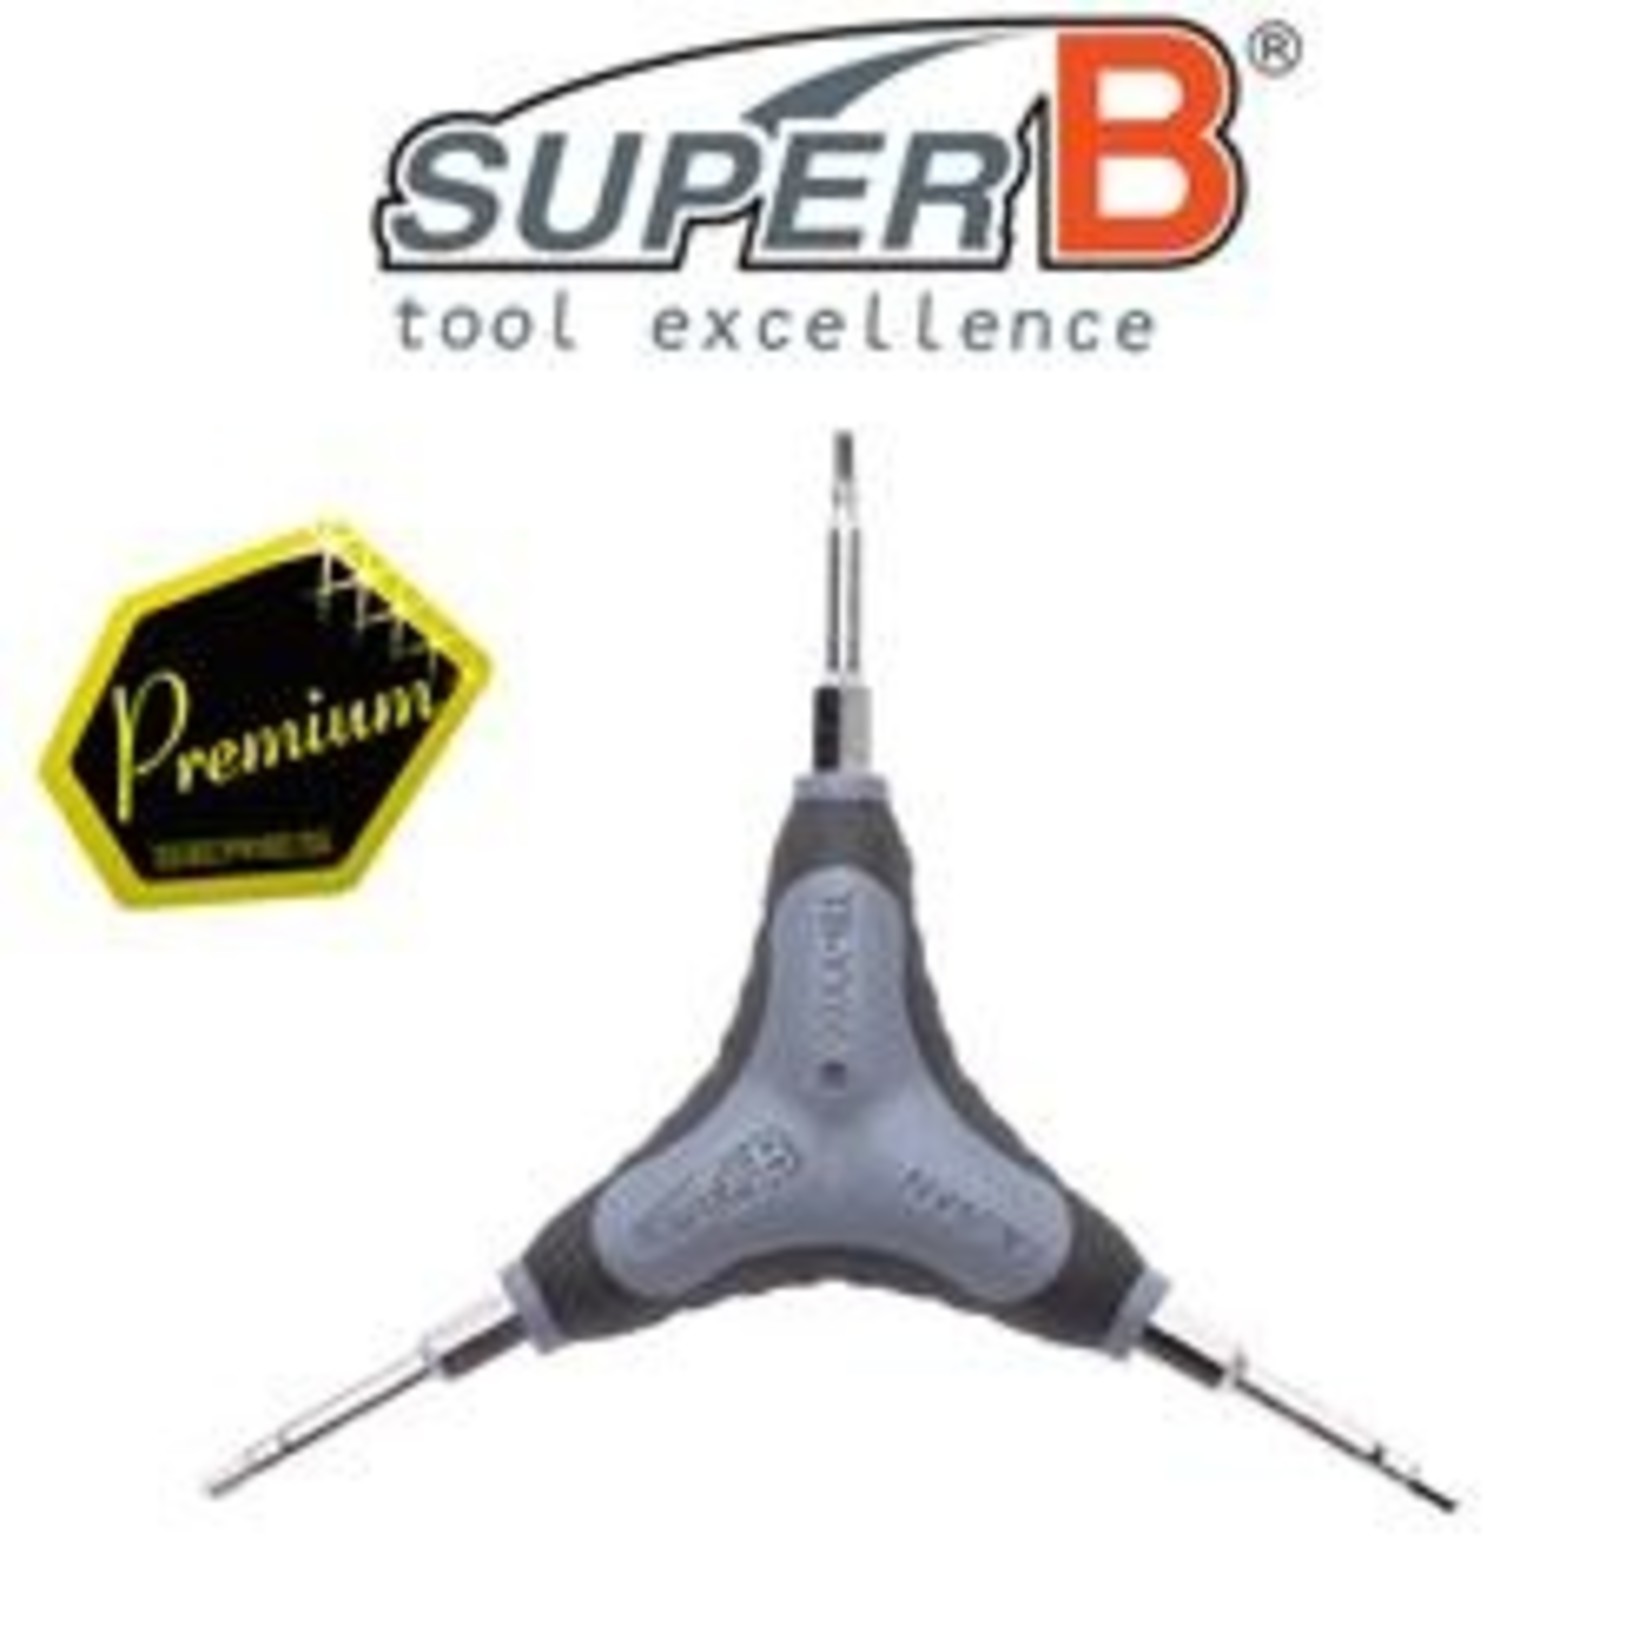 Super B SuperB Y Wrench - 2/2.5/3mm Hex Key Heat-Treated Steel For Superior - Bike Tool